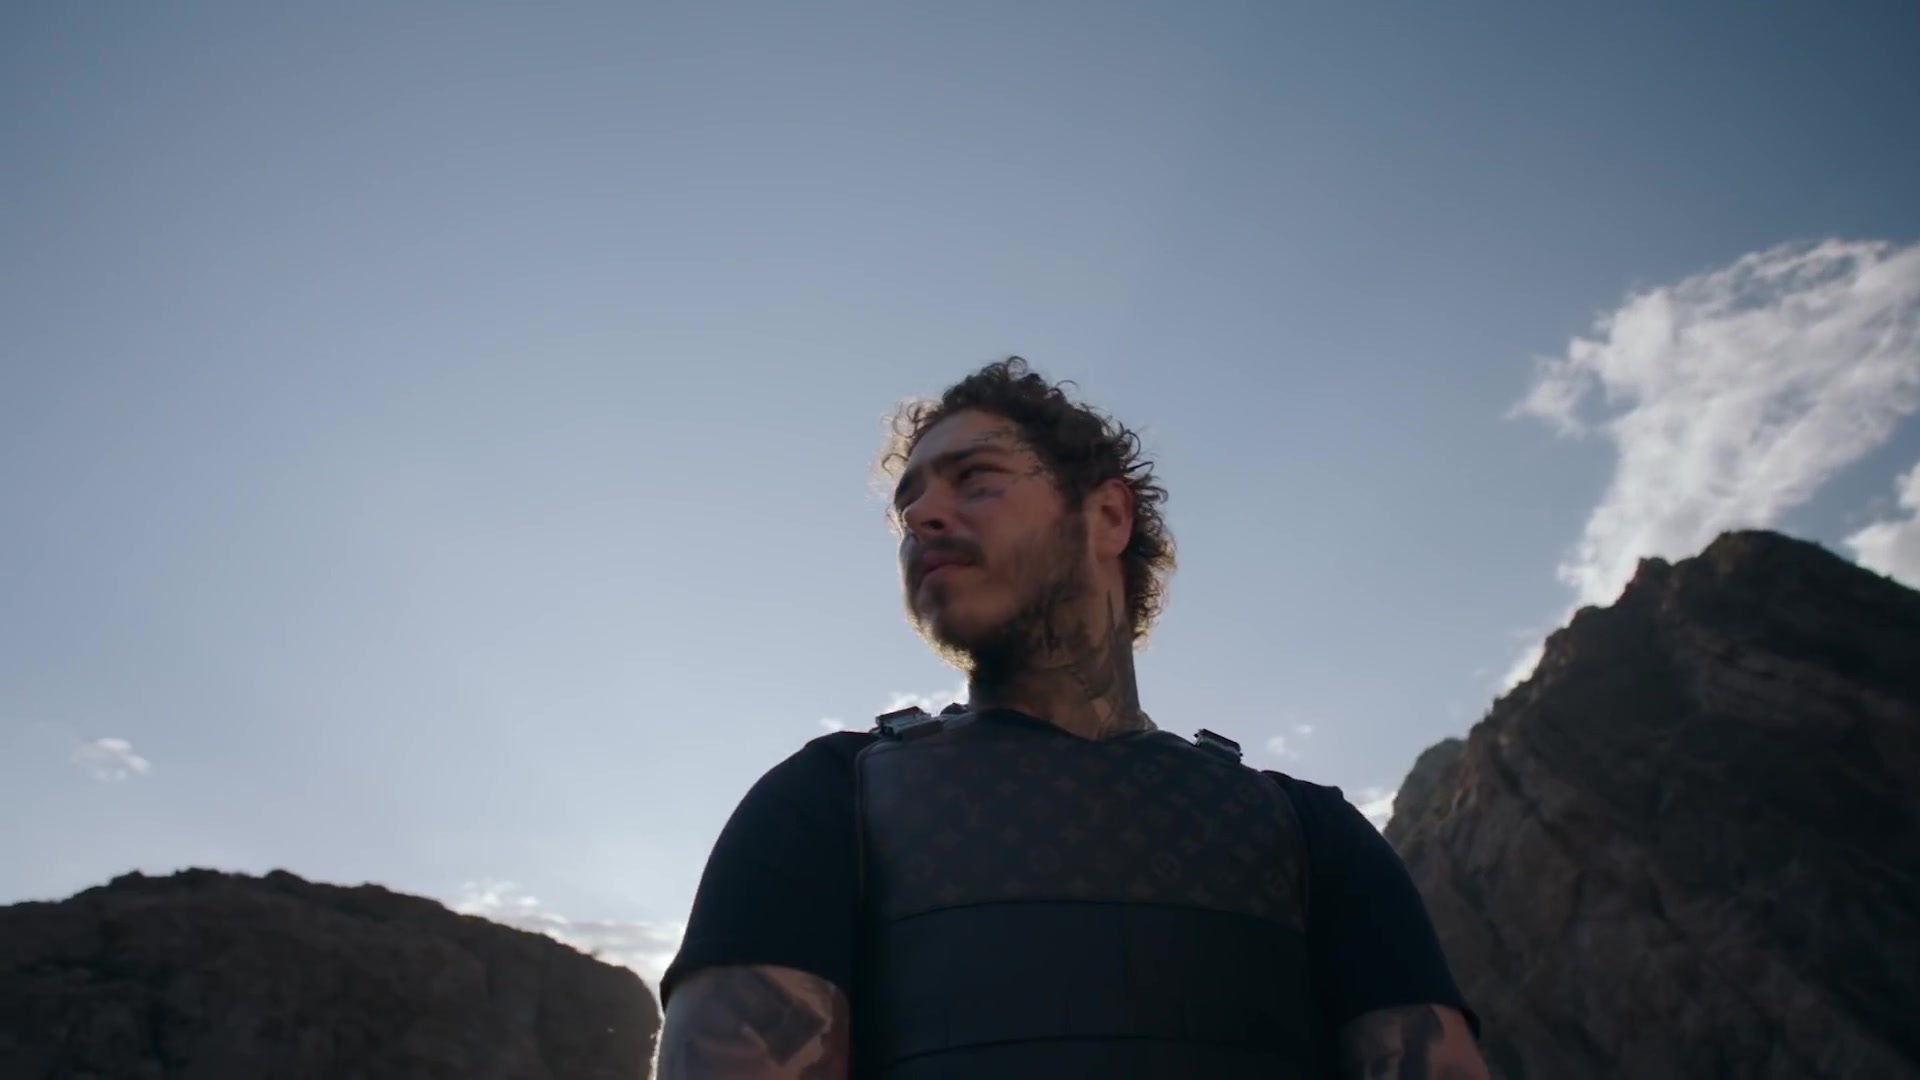 Innocent Armor - Post Malone was shown wearing a Louis Vuitton bullet-proof  vest in Saint-Tropezmusic video. Not all body armor needs to be noticed,  however. Our clothing is meant to be protective